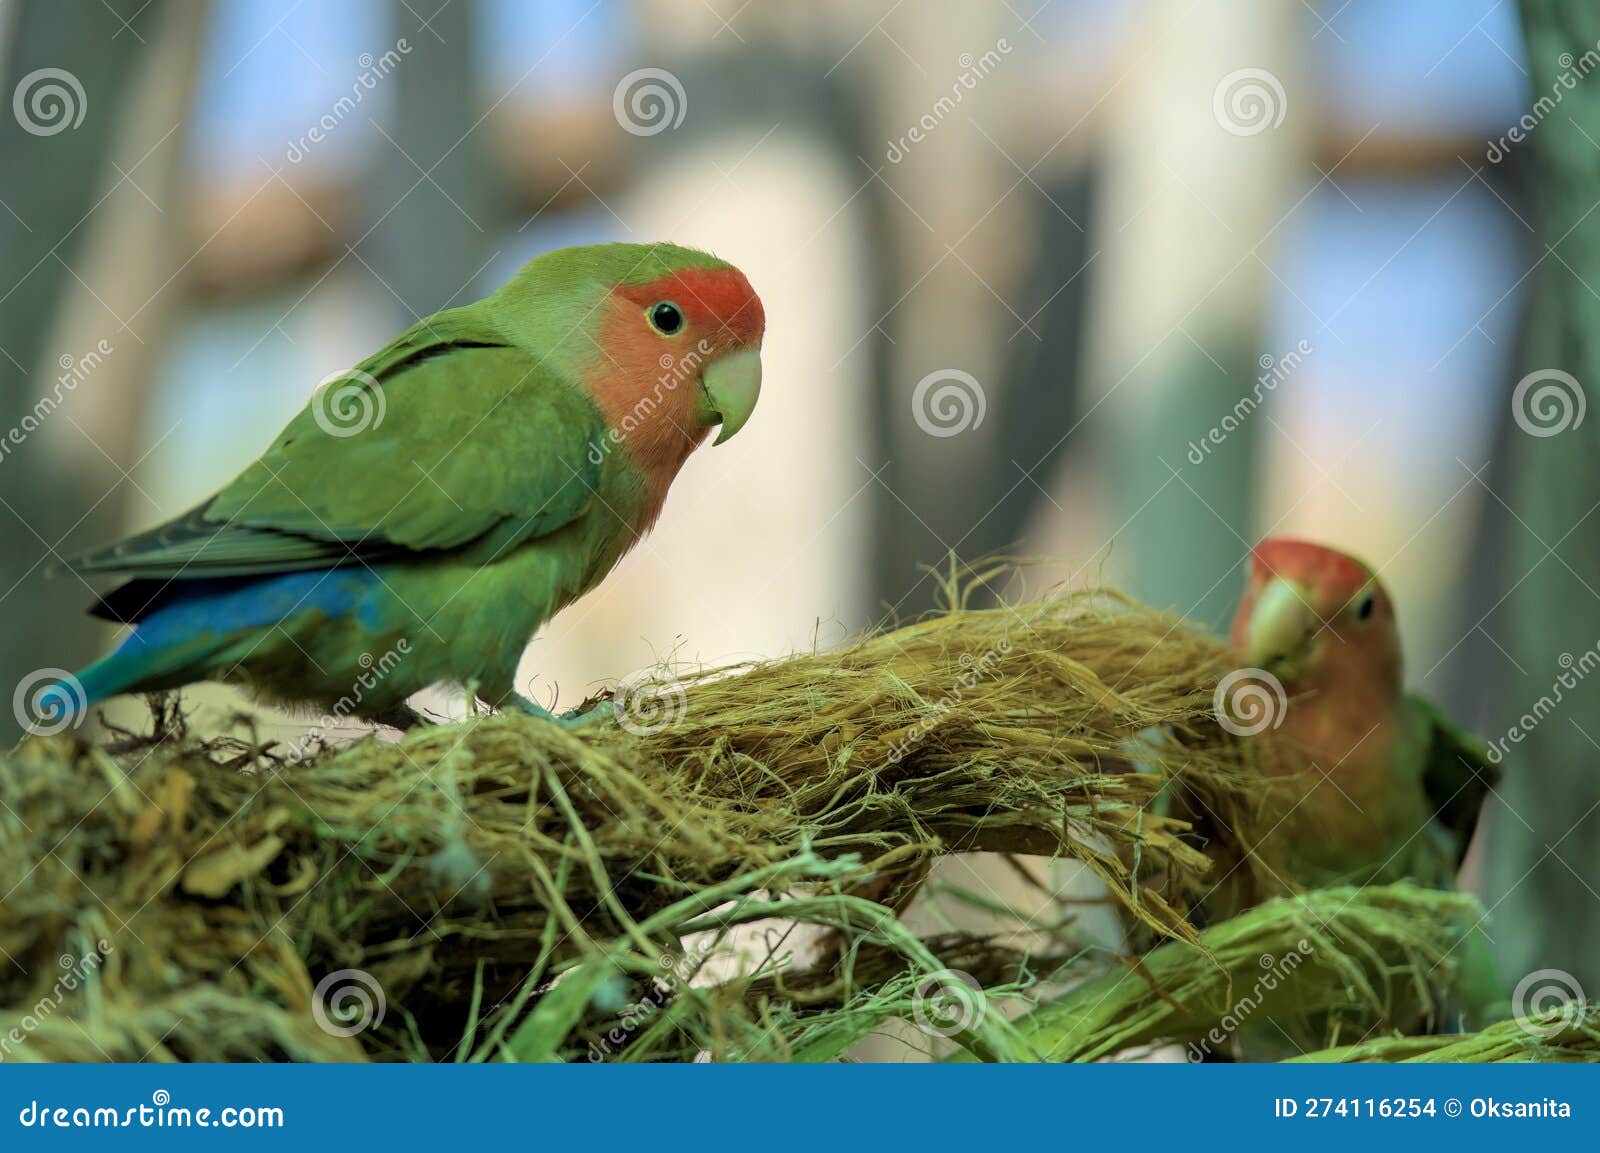 Rosy-Faced Lovebird Parrot Bird Is Sitting On A Branch And Building A Nest.  Stock Photo - Image Of Color, Wild: 274116254